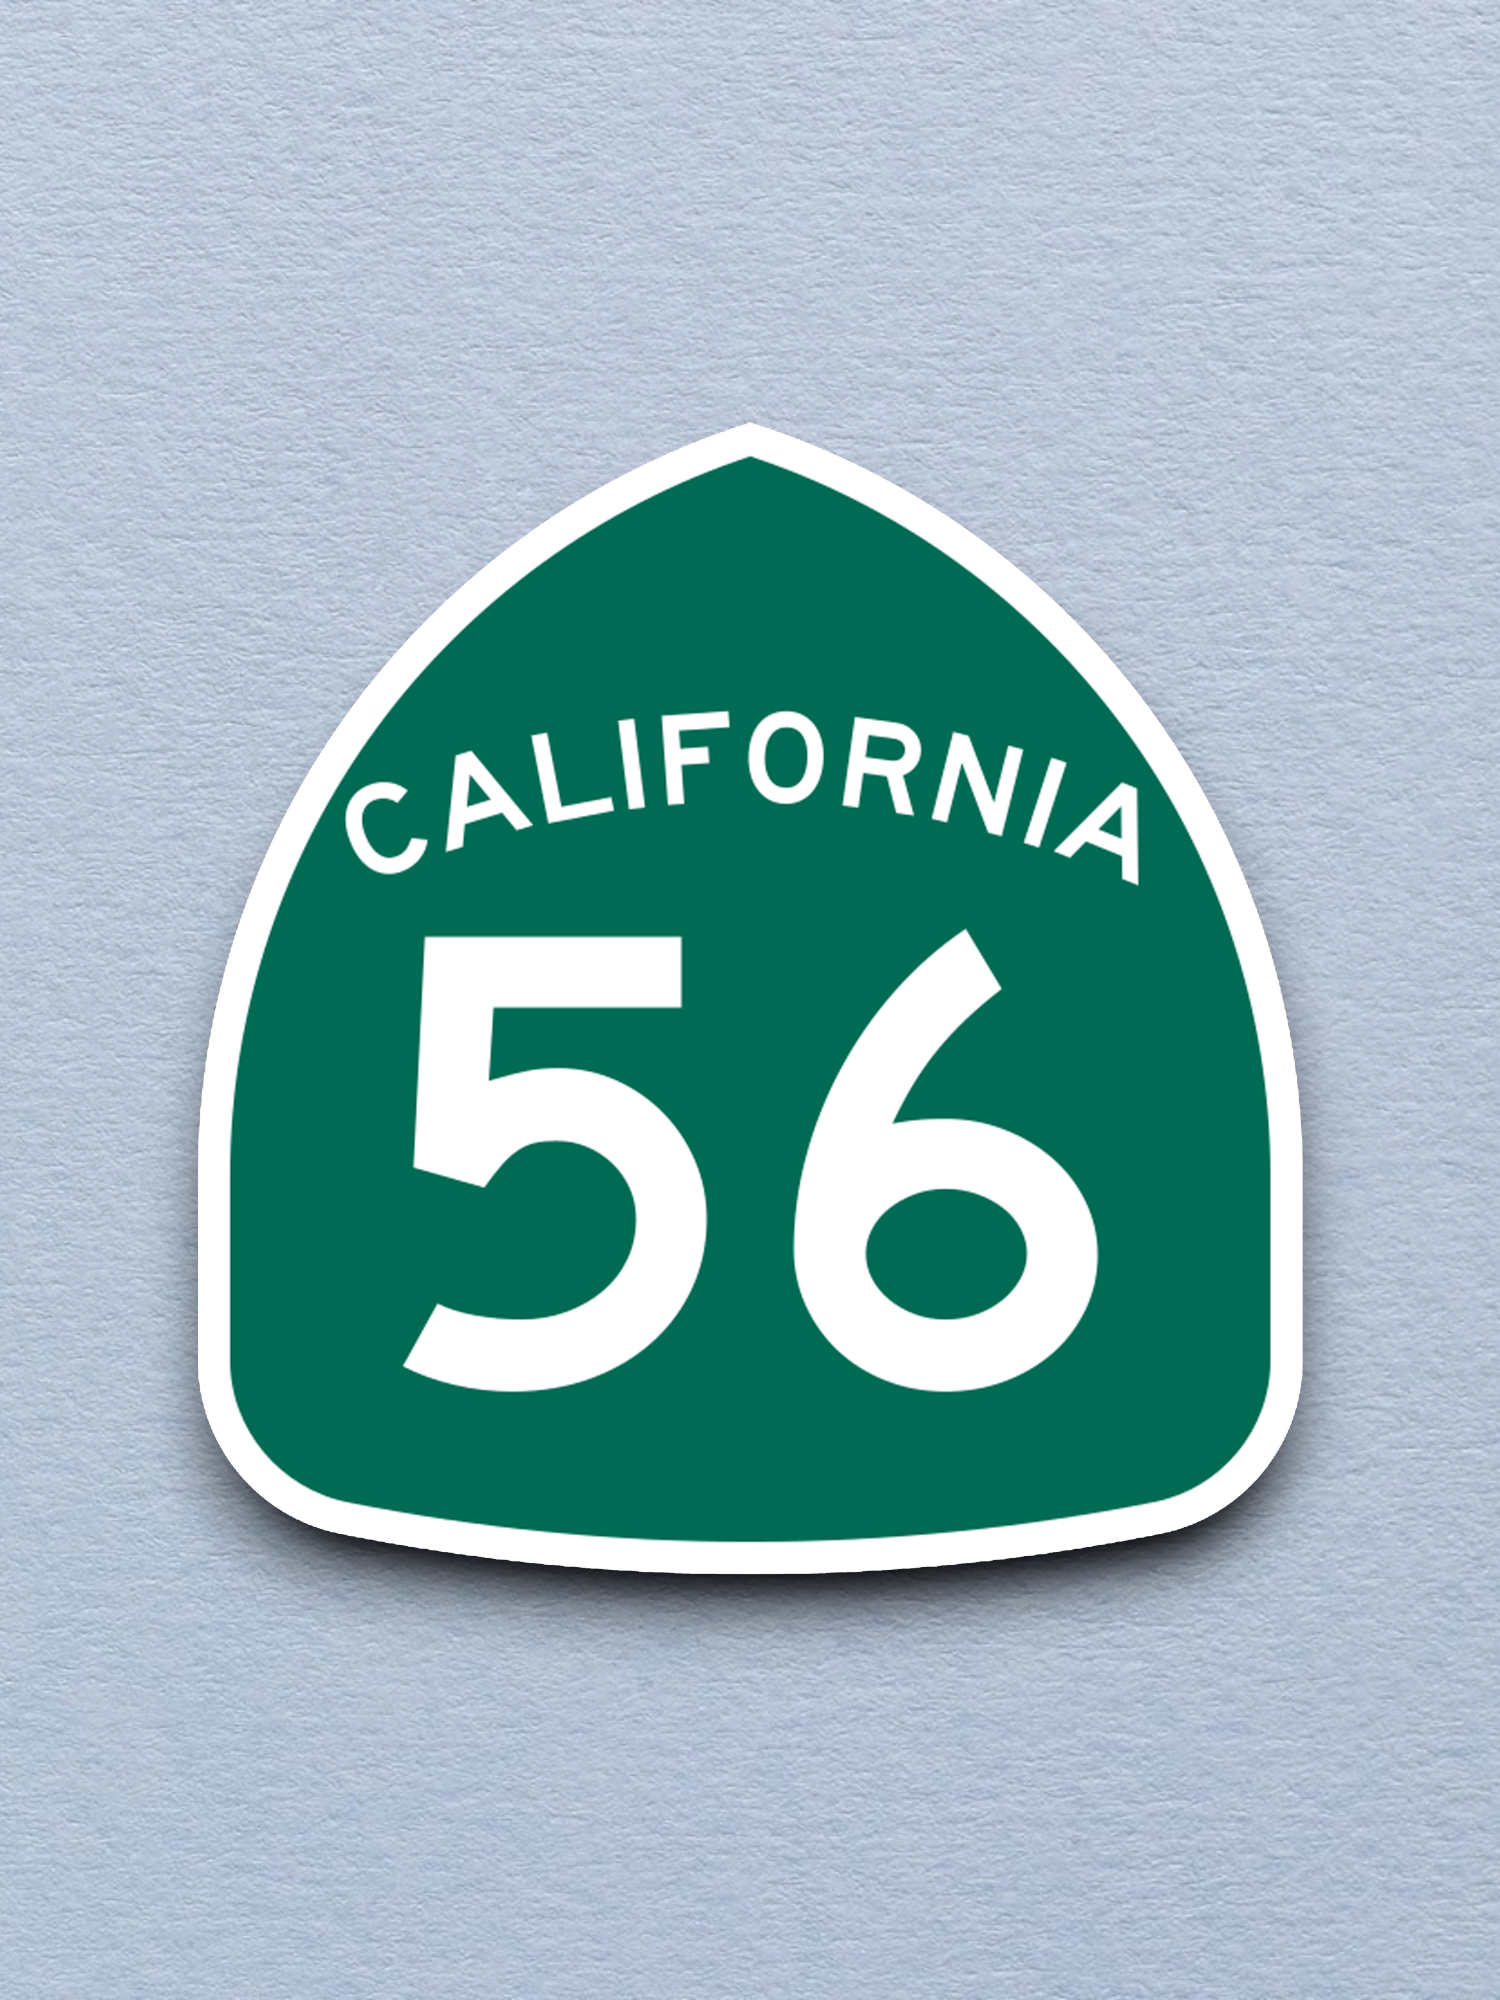 California State Route 56 Road Sign Sticker